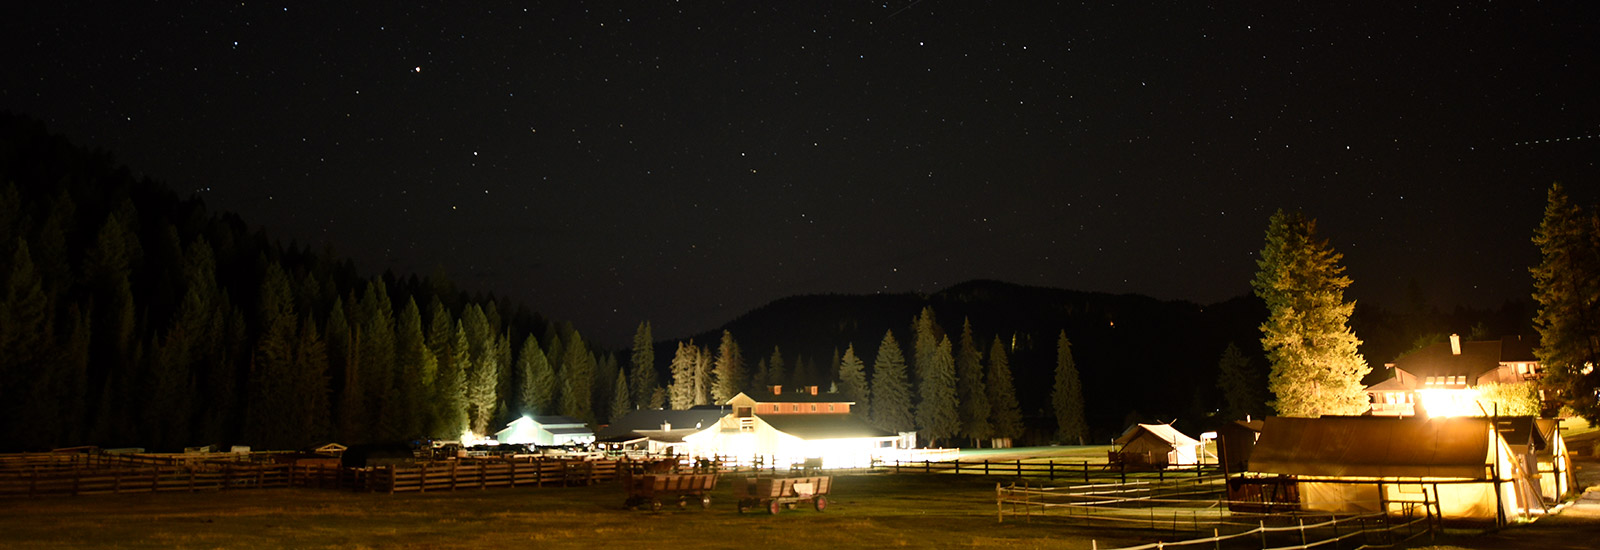 The Bar W Guest Ranch - Whitefish MT - Ranch Values